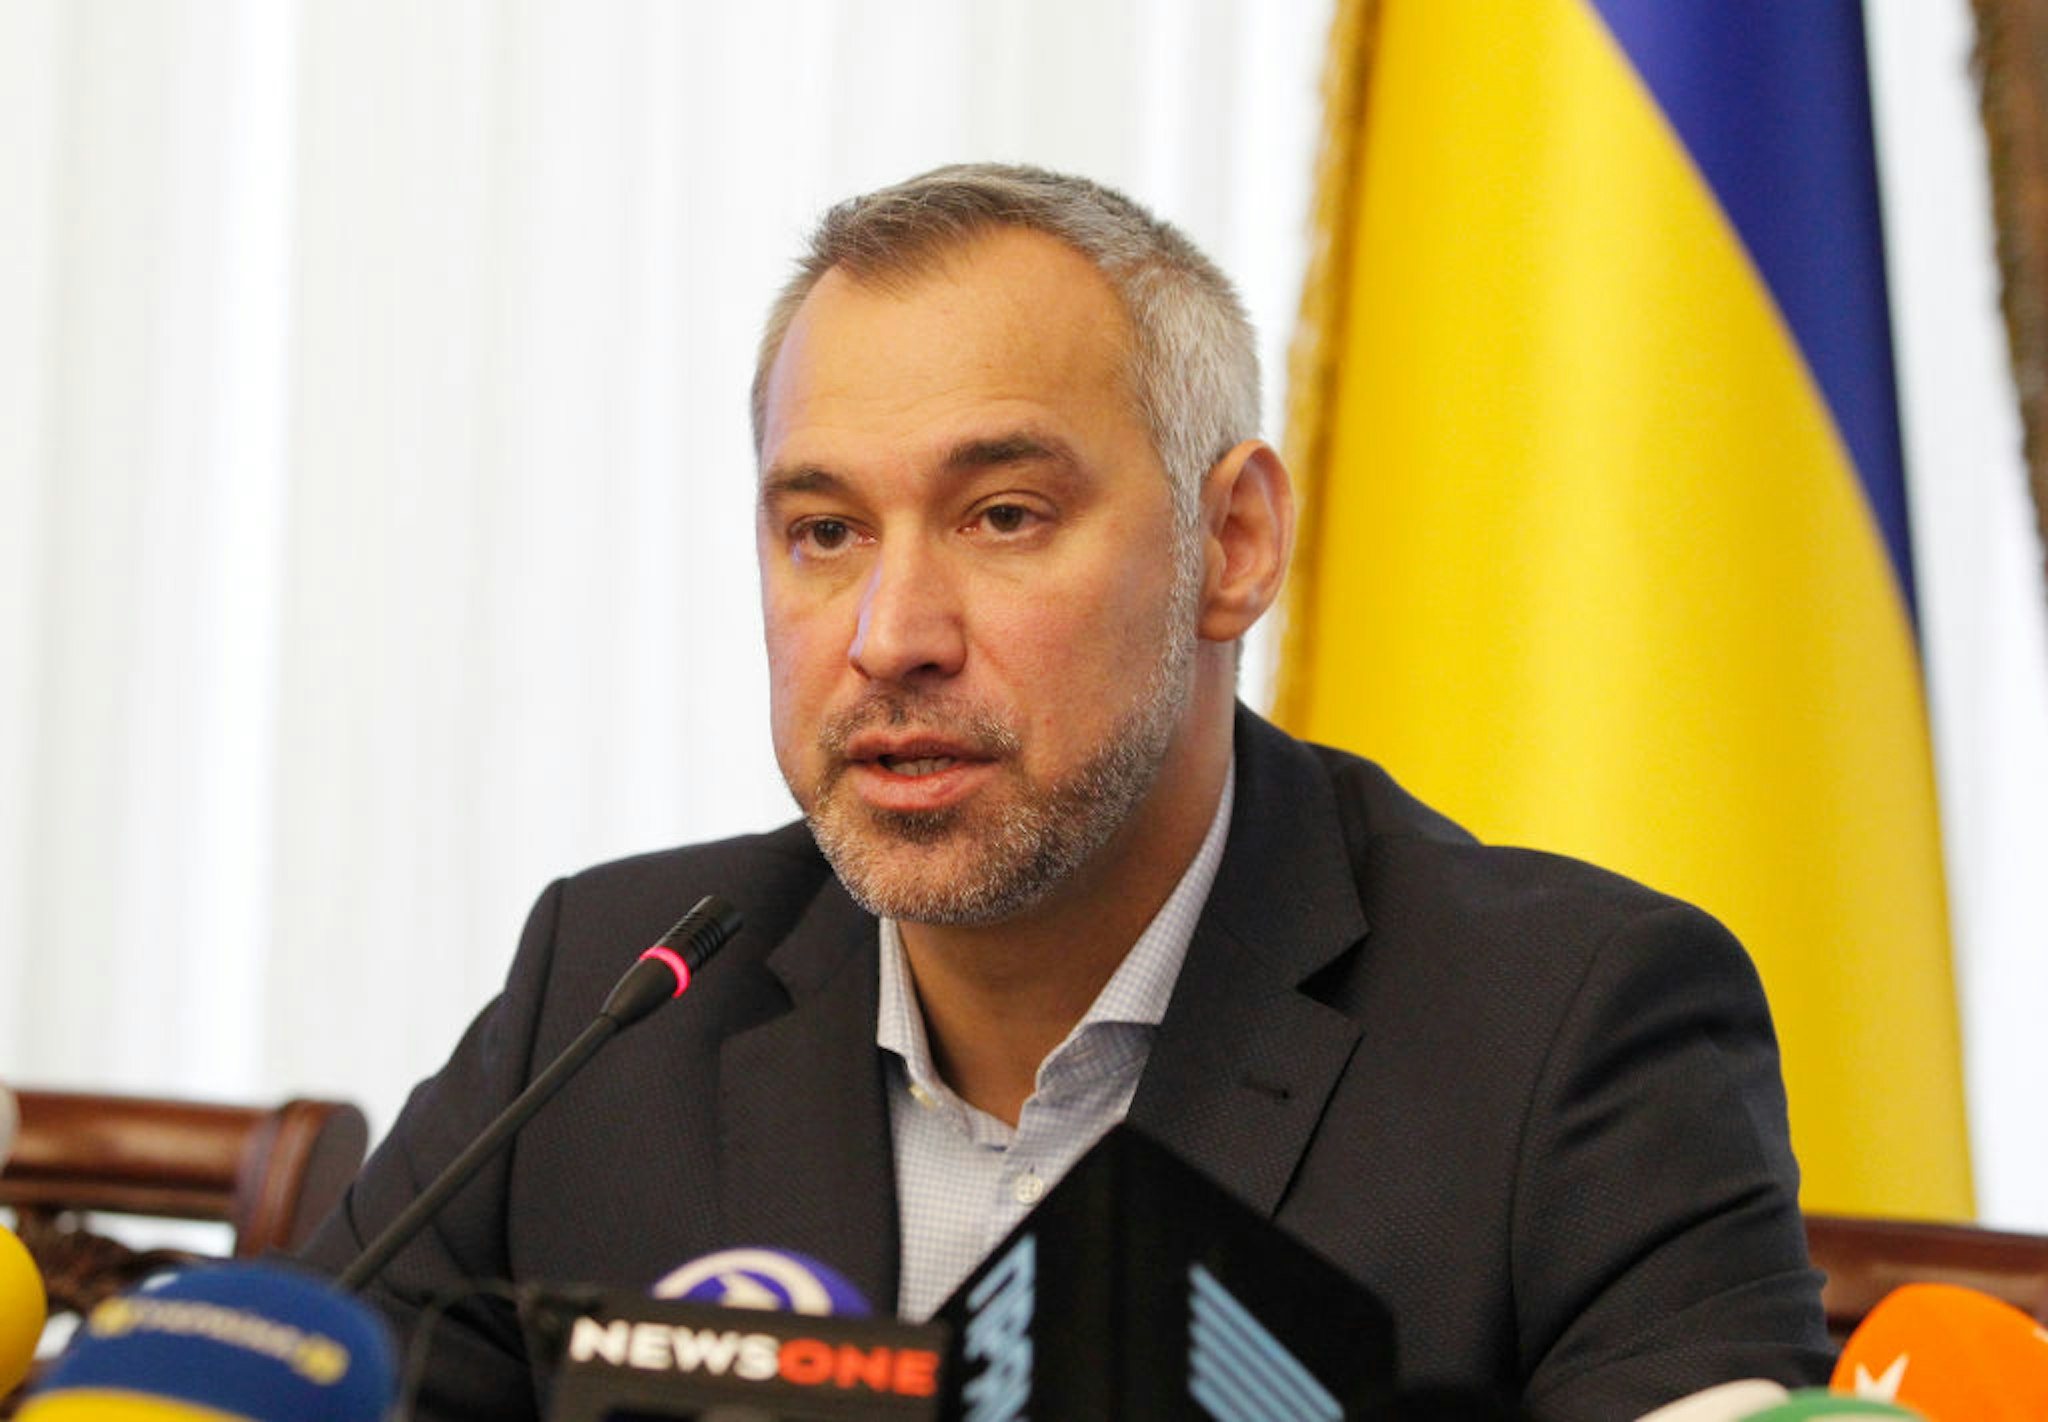 Prosecutor General of Ukraine Ruslan Riaboshapka speaks during a press-conference about the reform of the prosecution authorities in Kyiv, Ukraine, on 4 October, 2019.